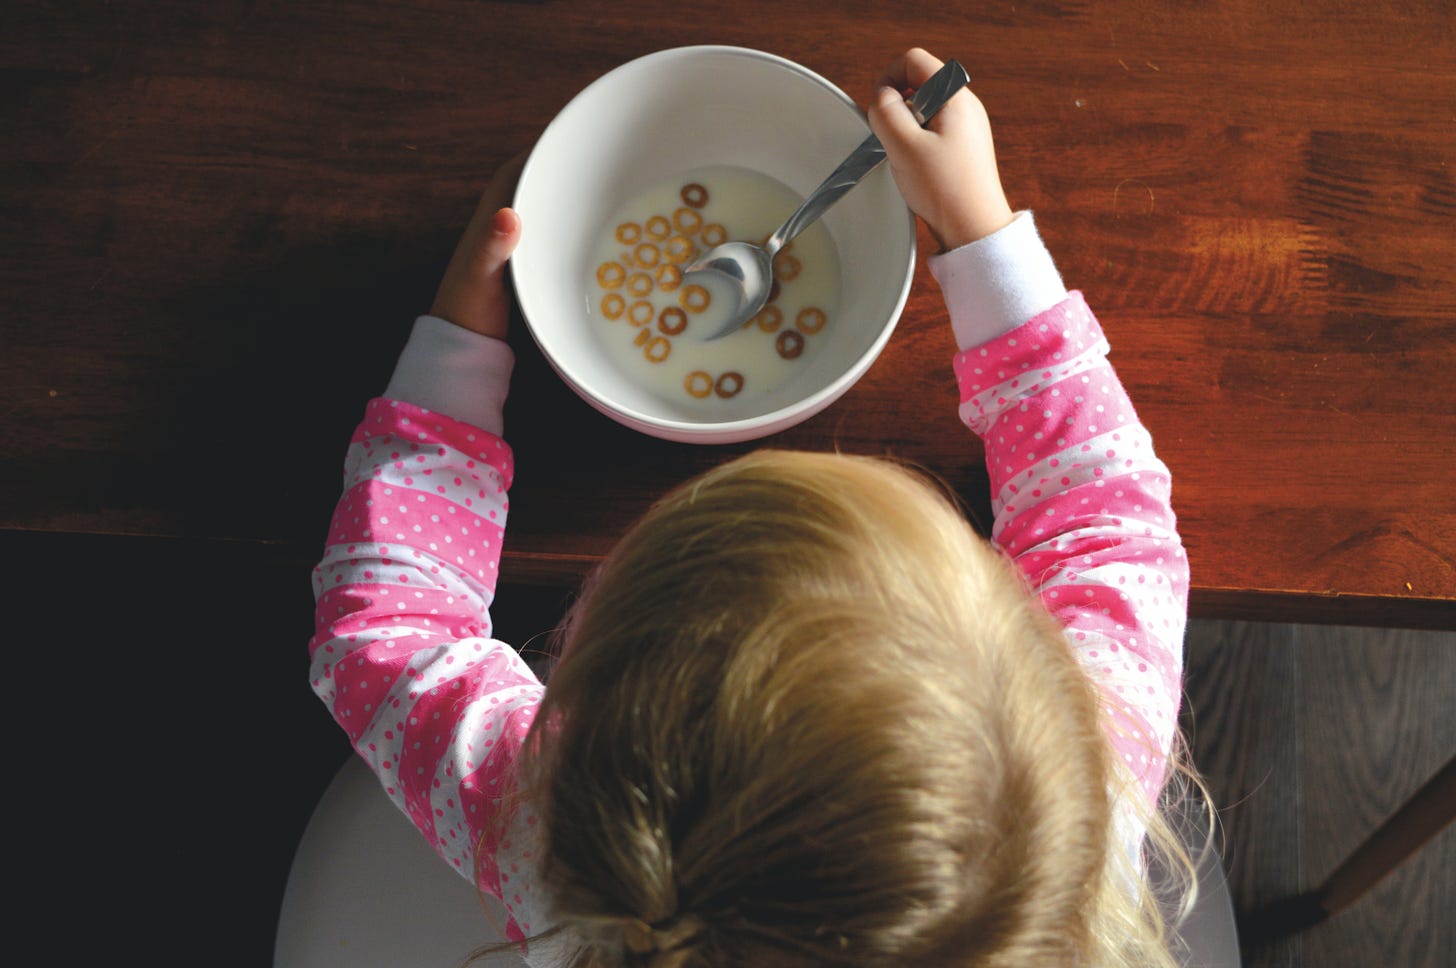 Child eating cereal from a white bowl on a table